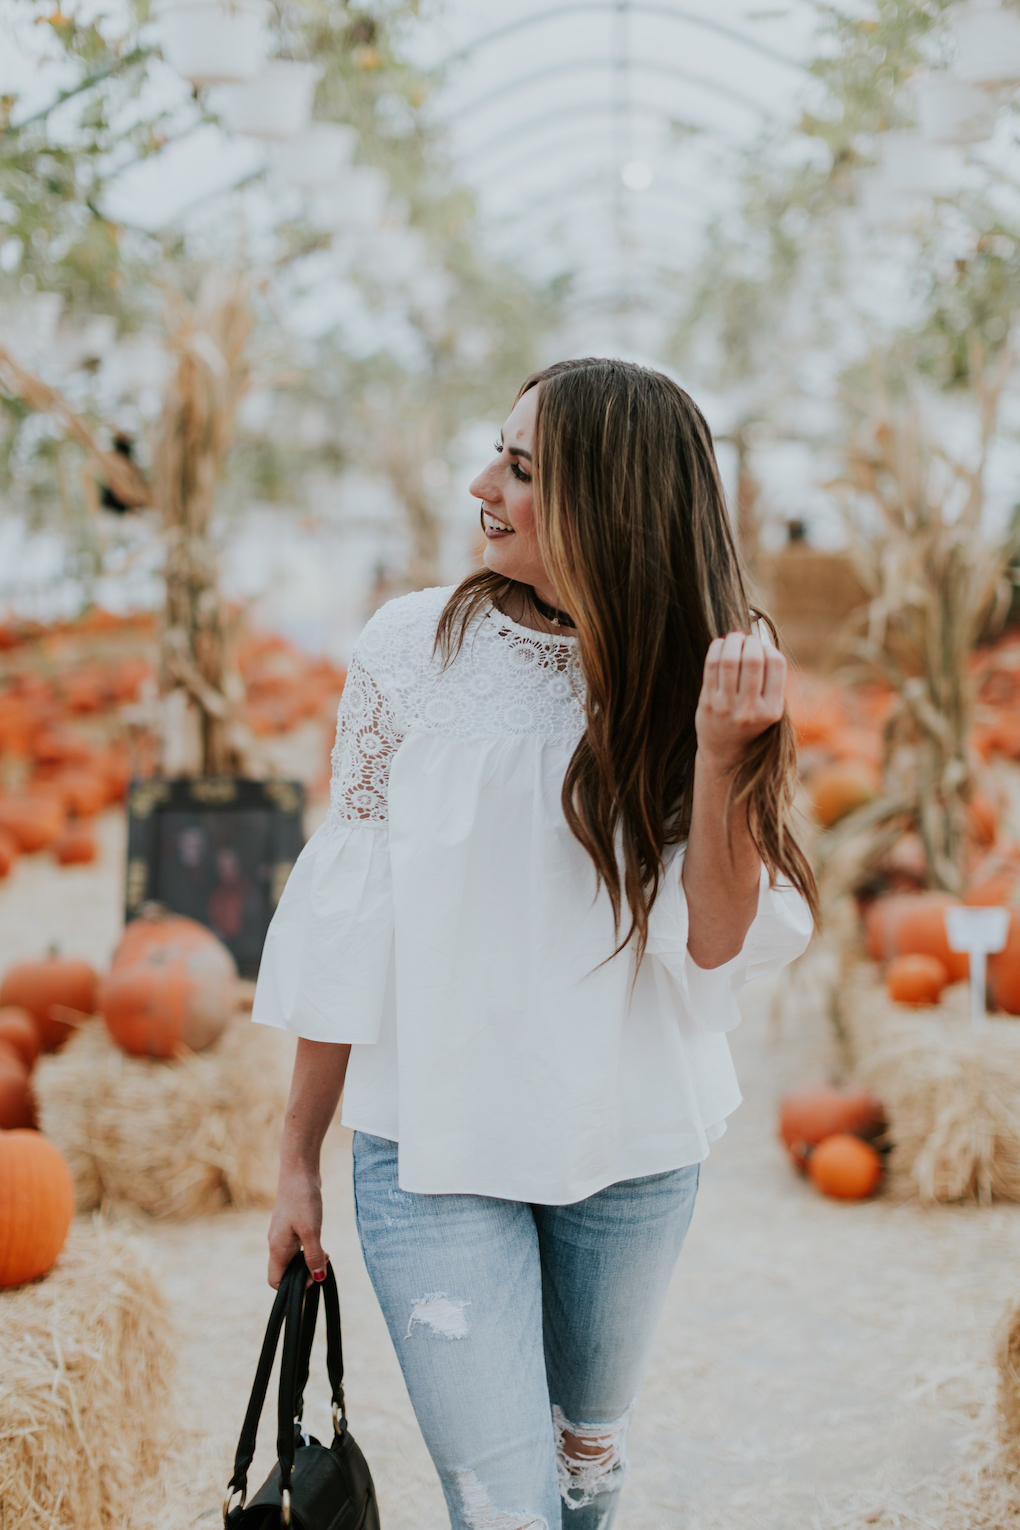 girl wearing white lace top with distressed denim and brown booties standing in a pumpkin patch with black diaper bag